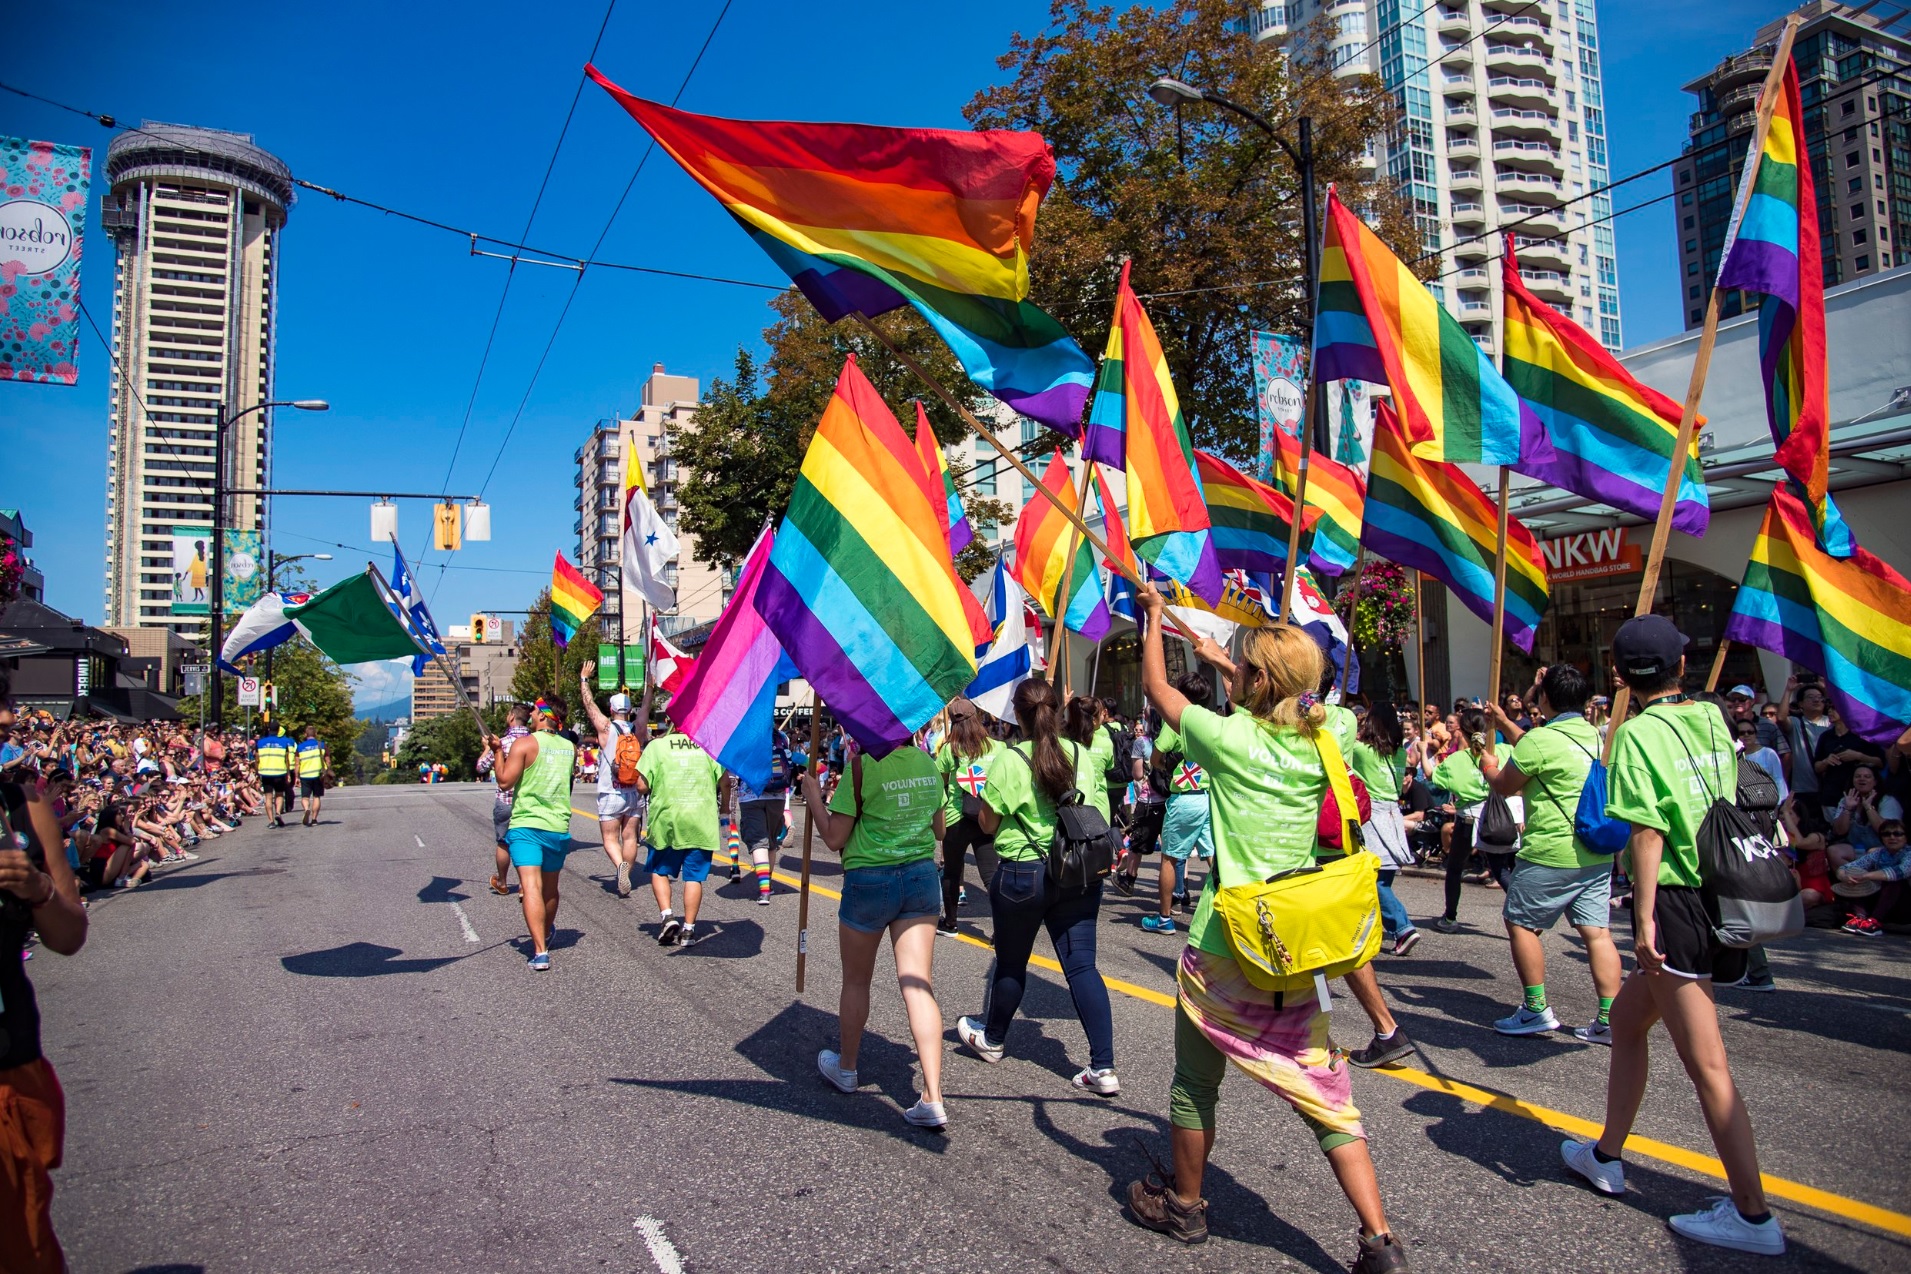 Vancouver Pride Guide with British Airways A city of smiles and